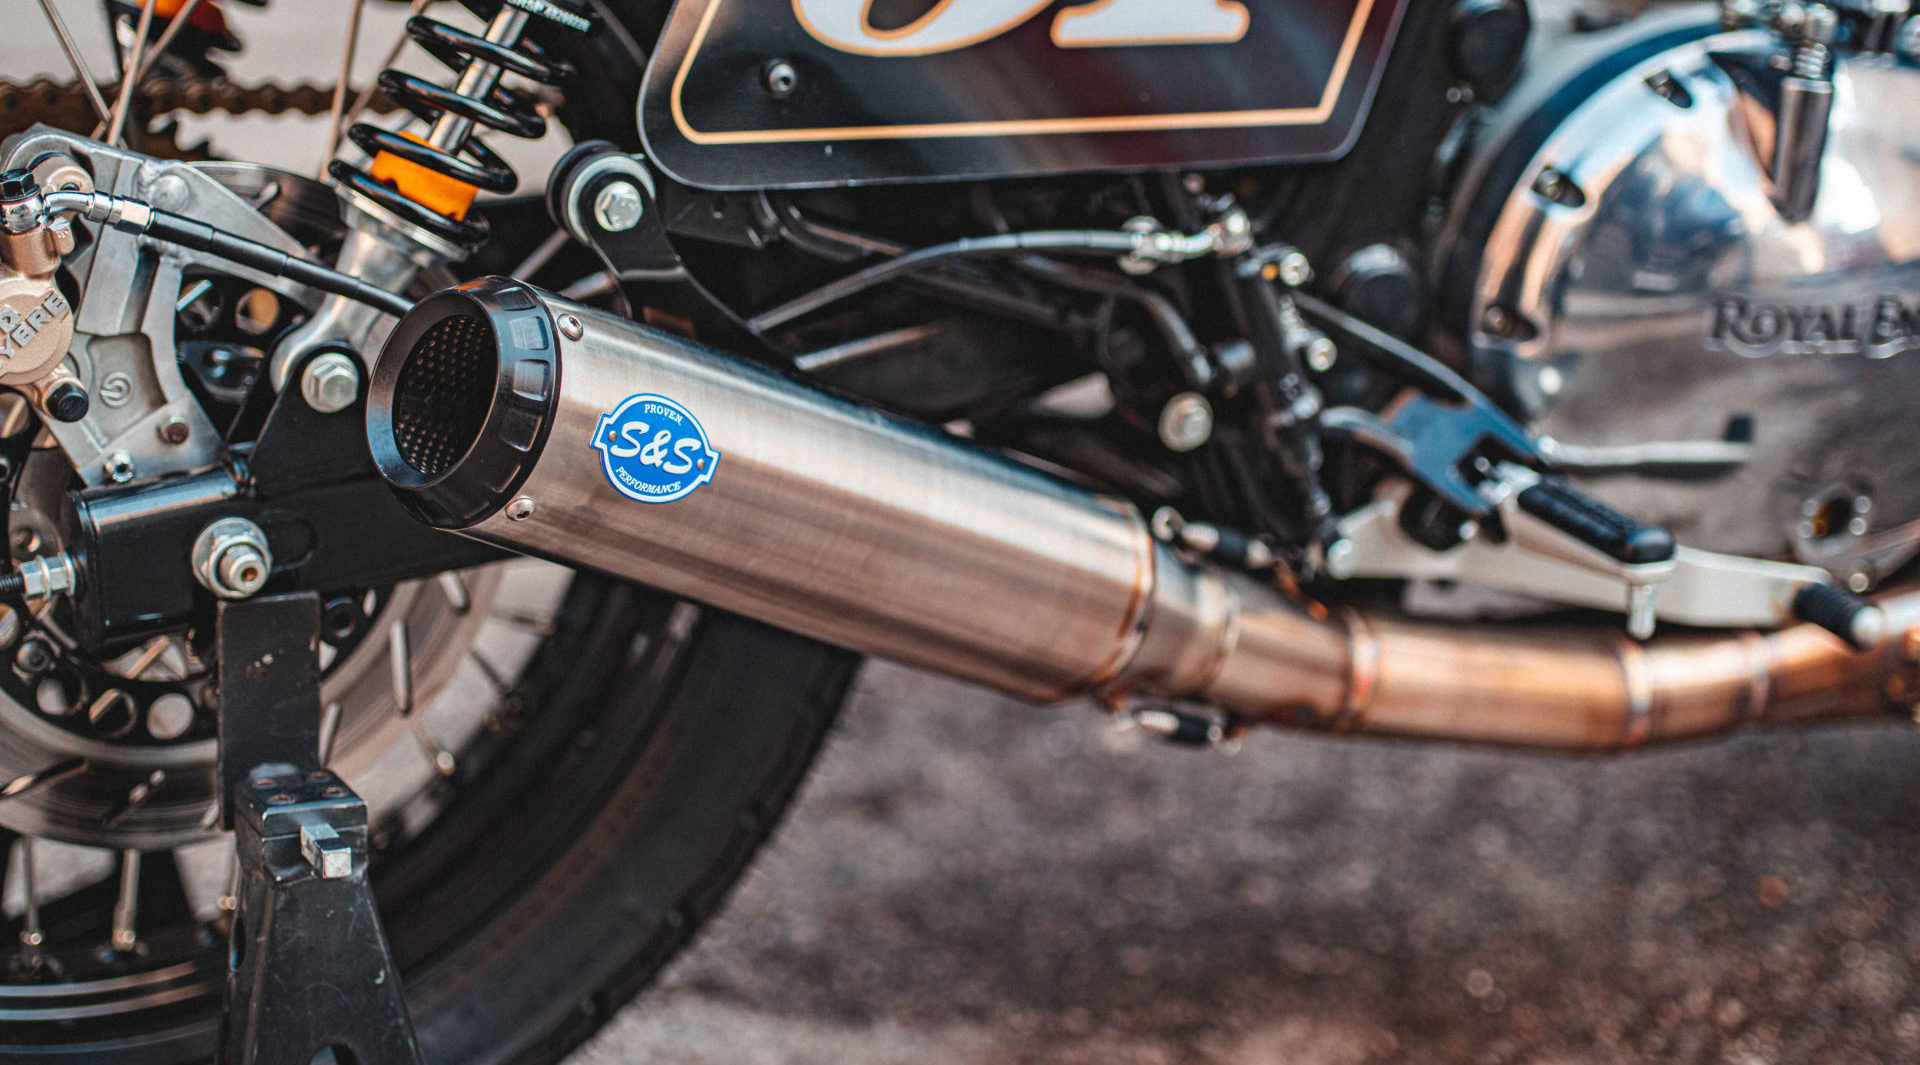 An S&S exhaust system on a Royal Enfield racebike. Photo courtesy Royal Enfield North America.